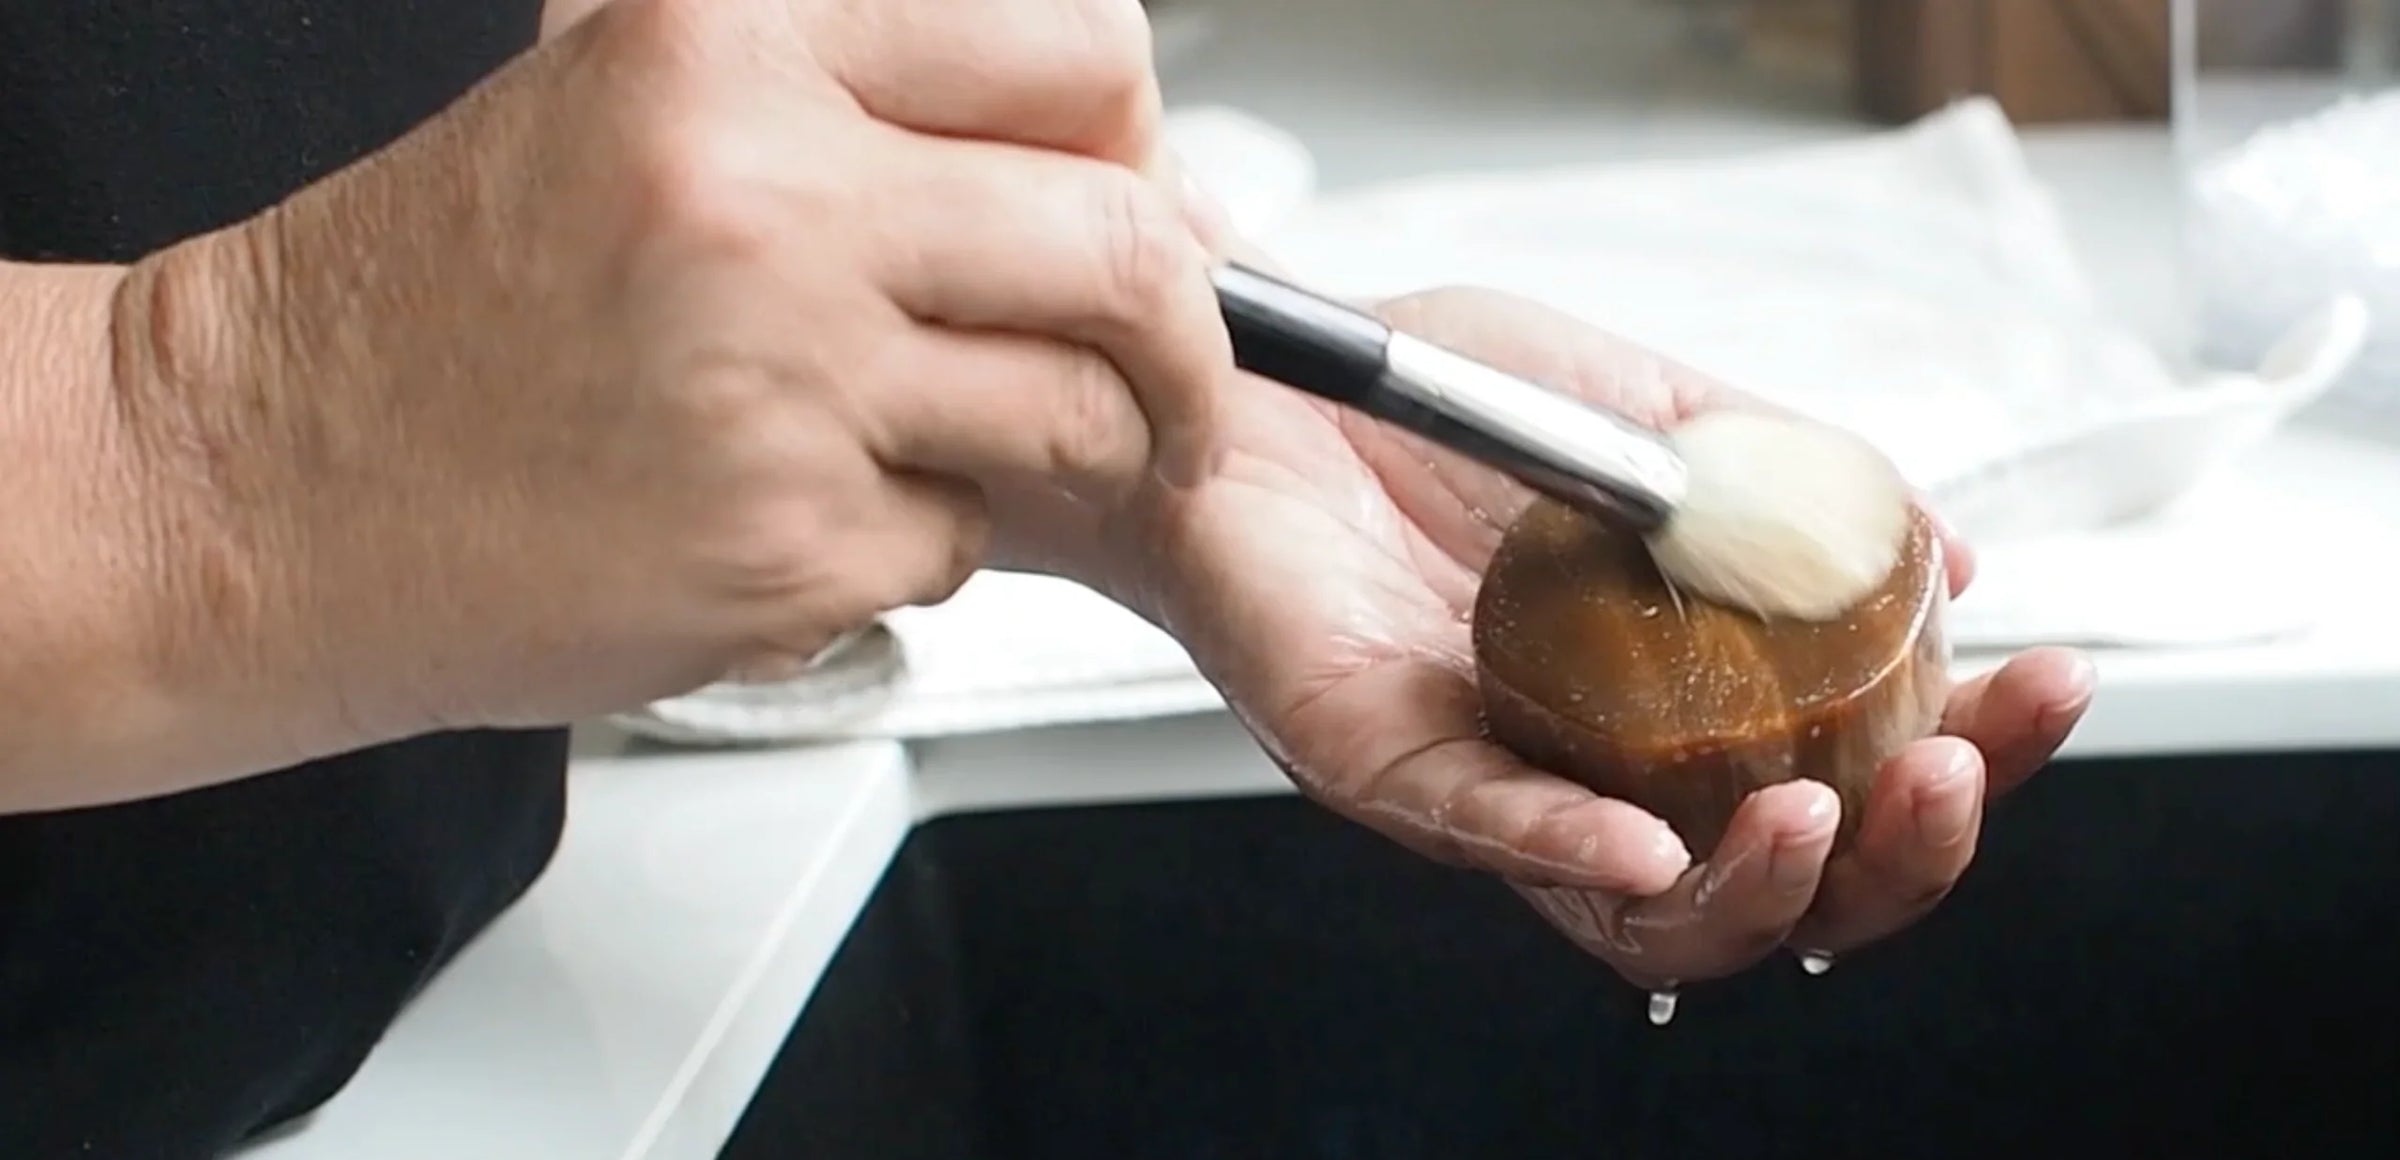 Hands using tiger's eye to clean a makeup brush over sink